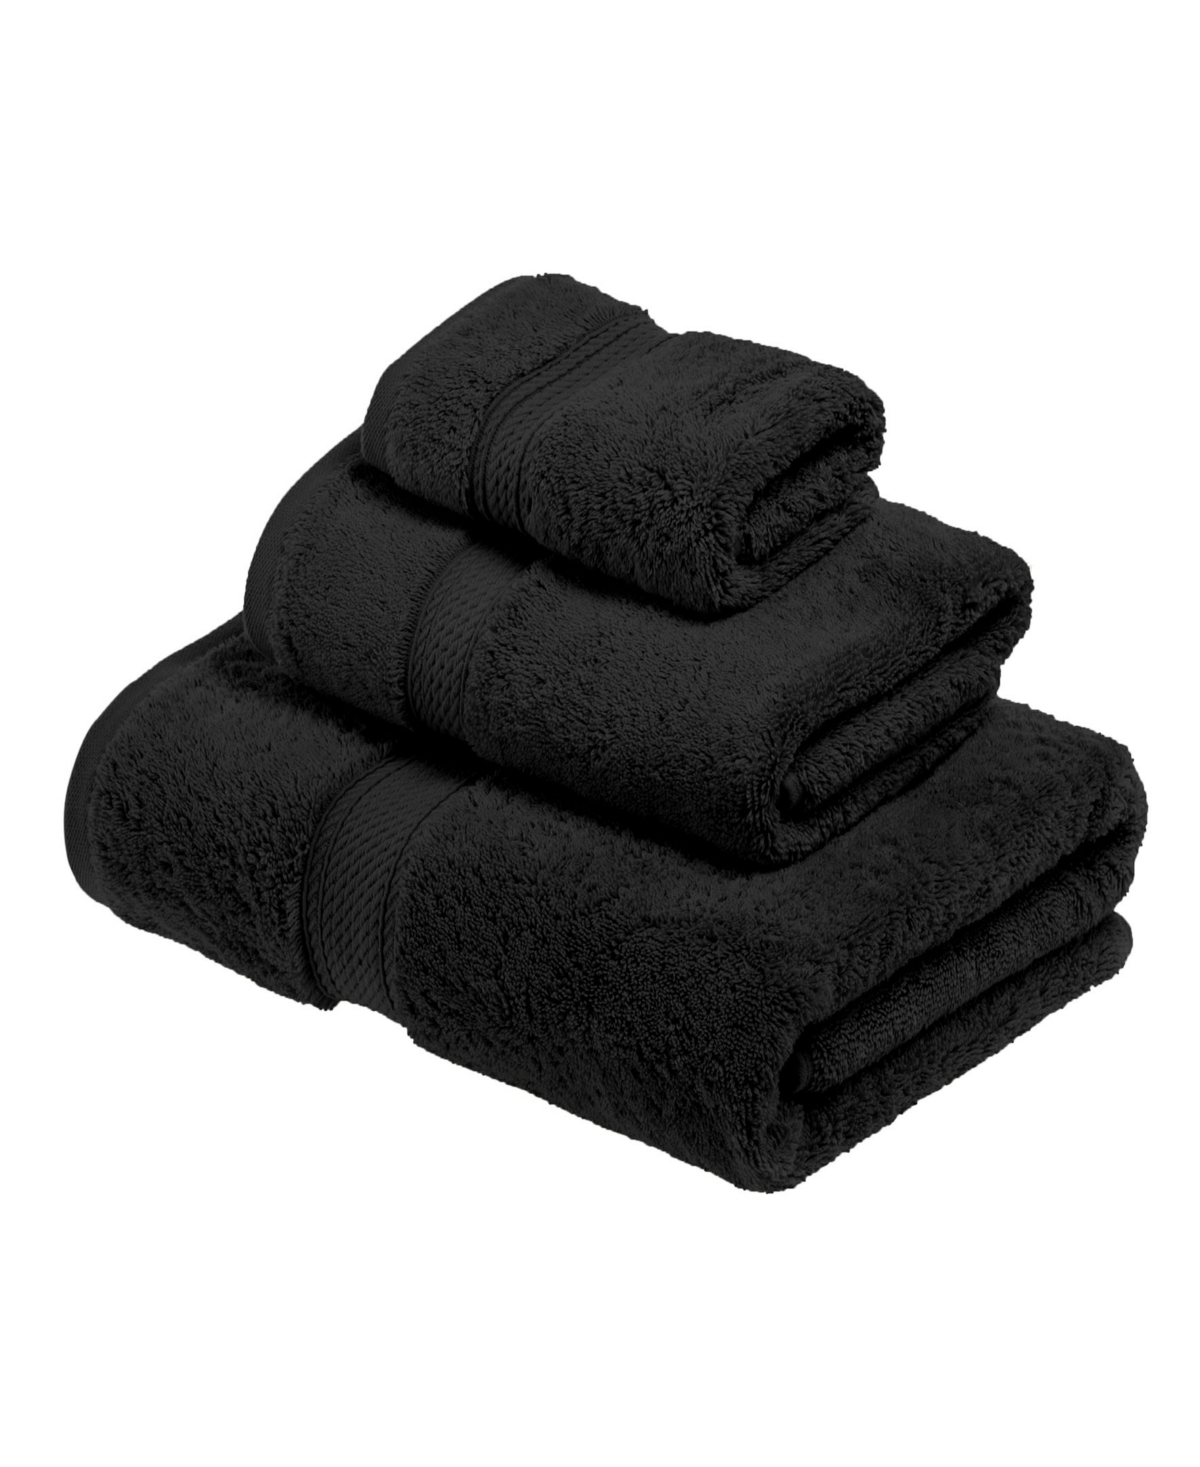 Superior Highly Absorbent Egyptian Cotton 3-piece Ultra Plush Solid Assorted Towel Set Bedding In Black